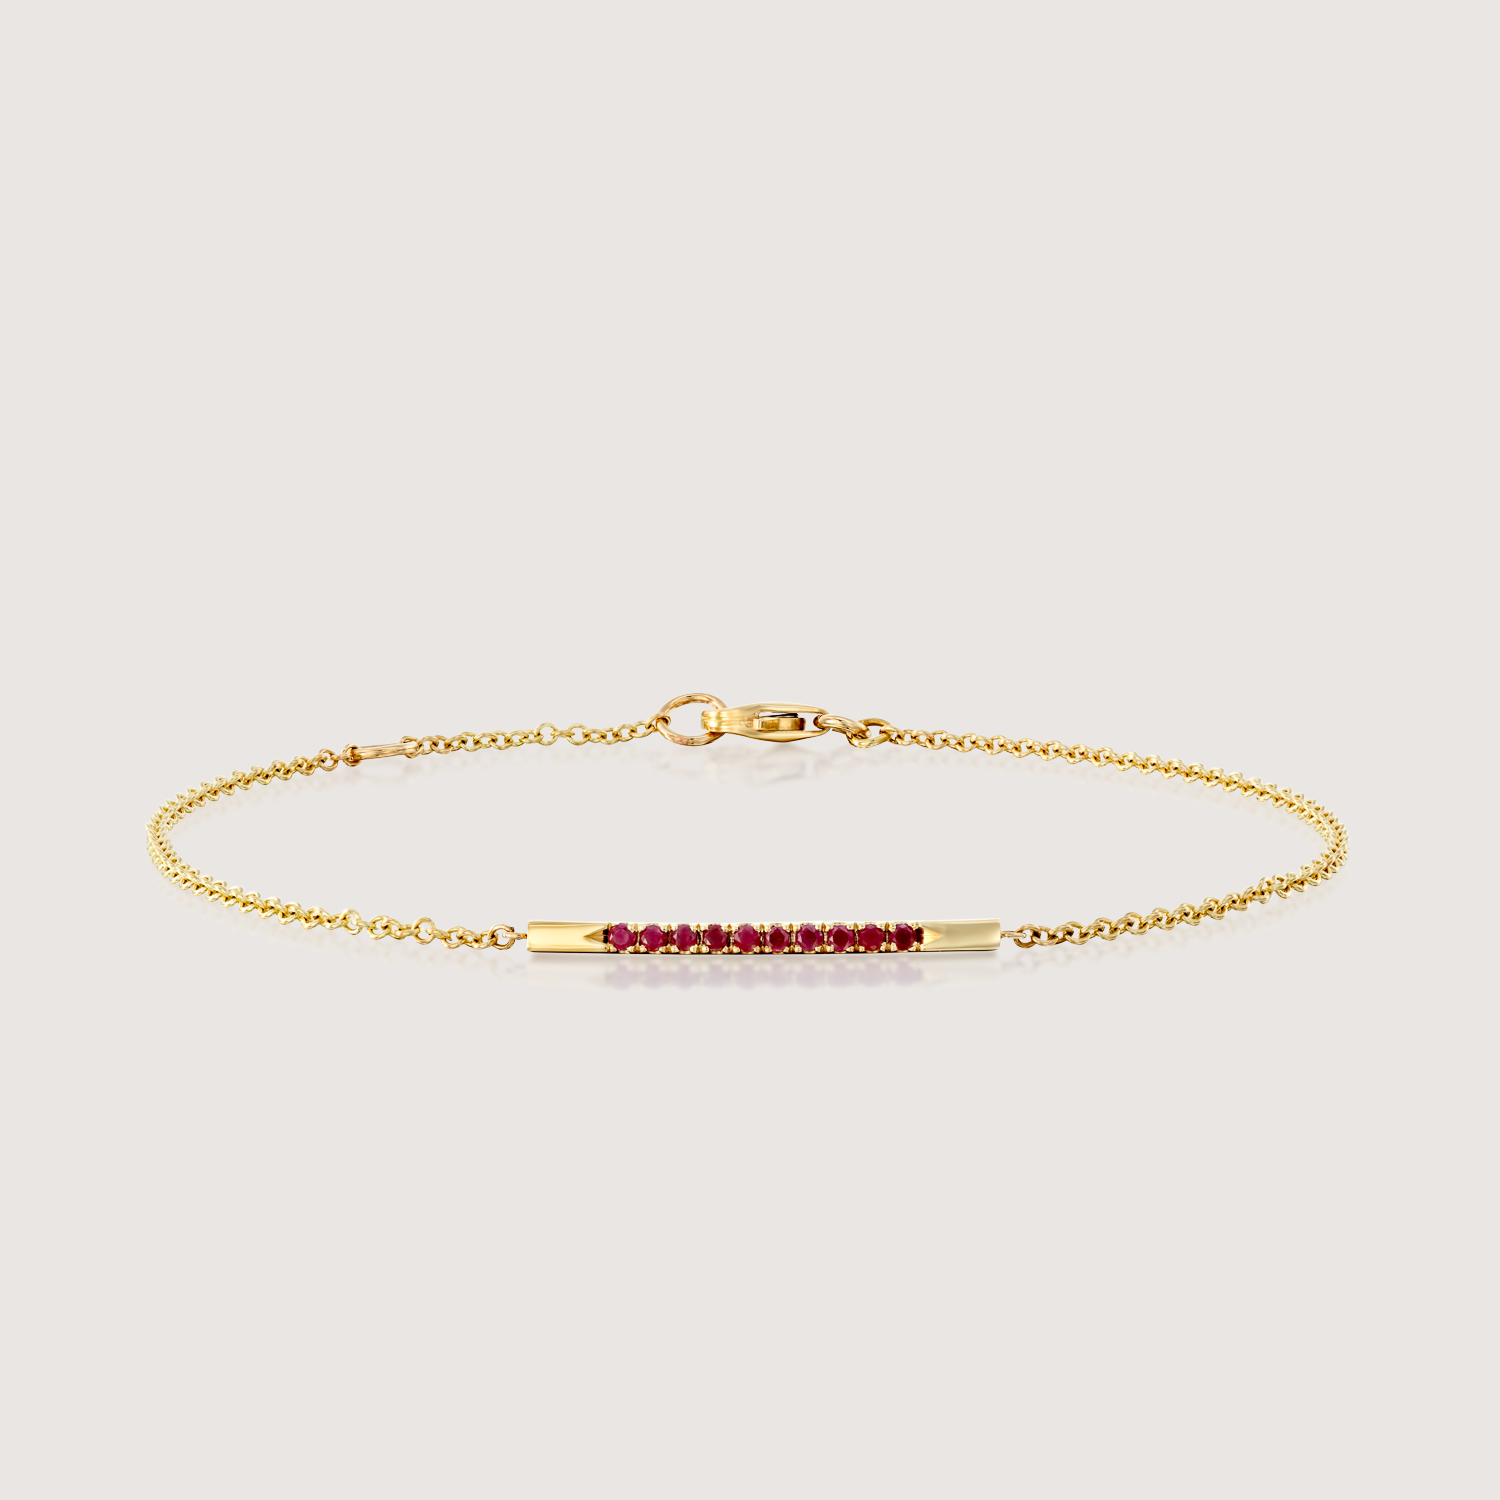 Andrea  Gold Bracelet Set With rubies